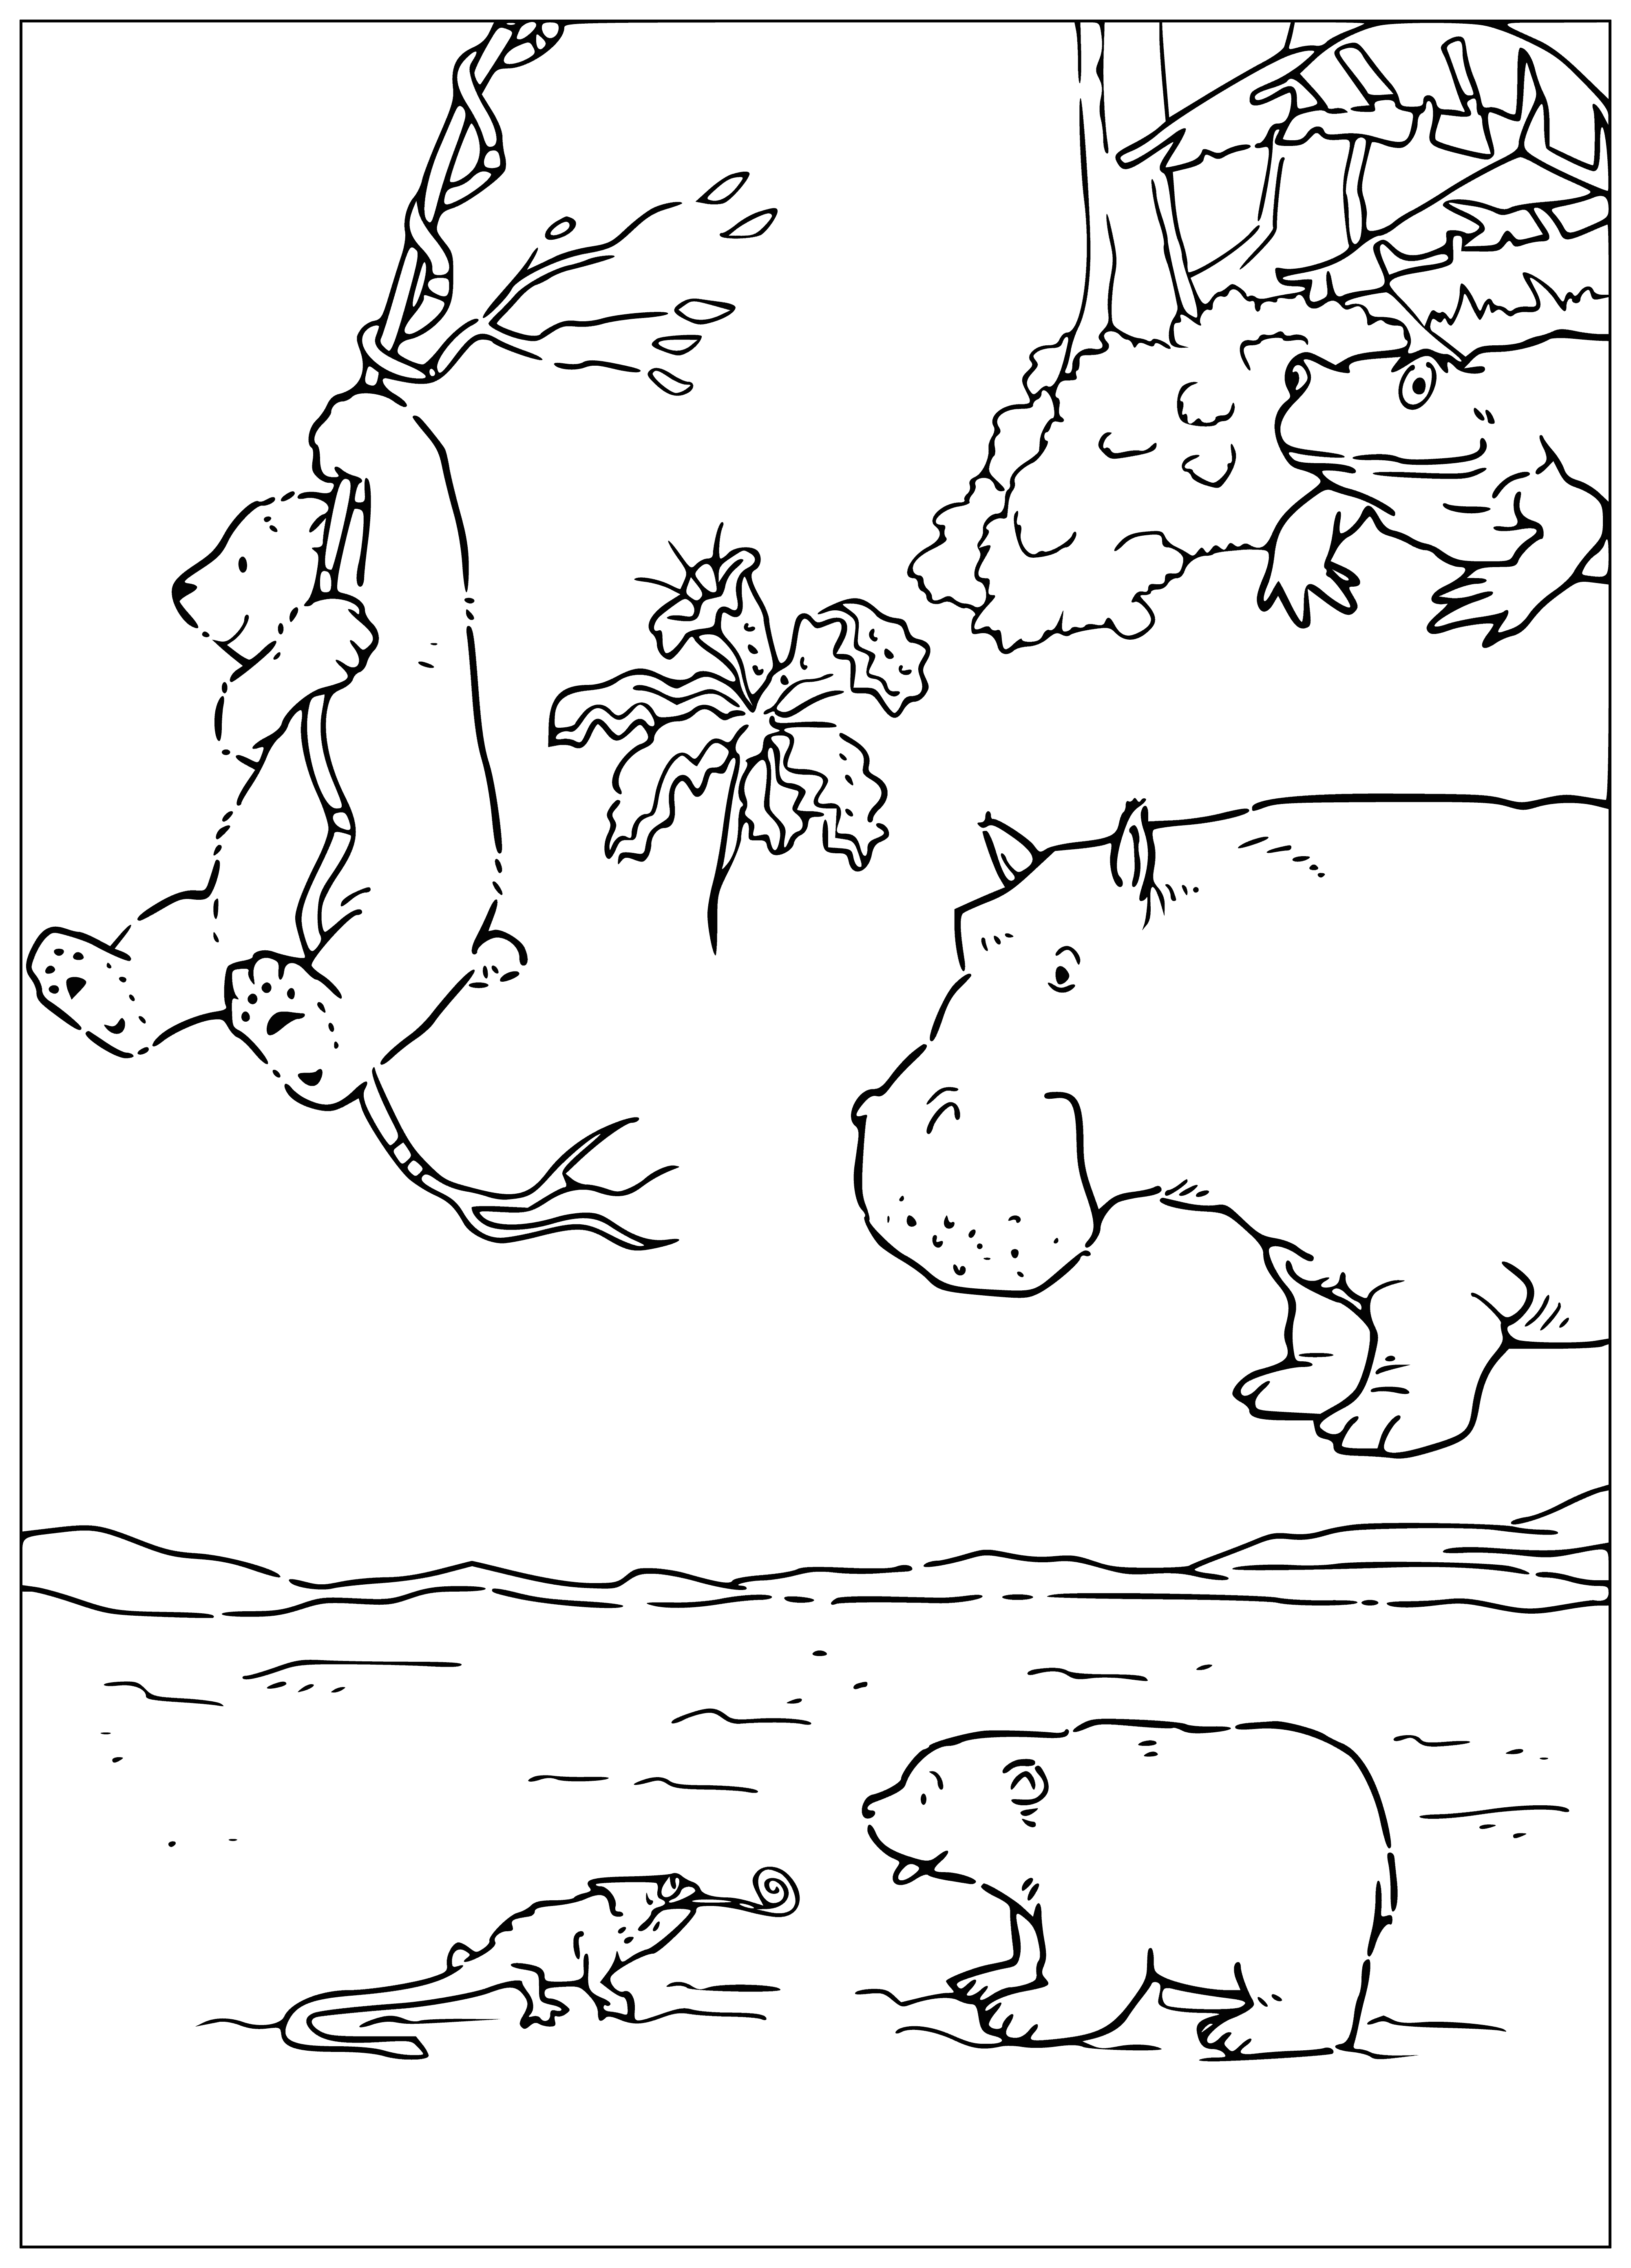 Teddy bear Lars coloring page